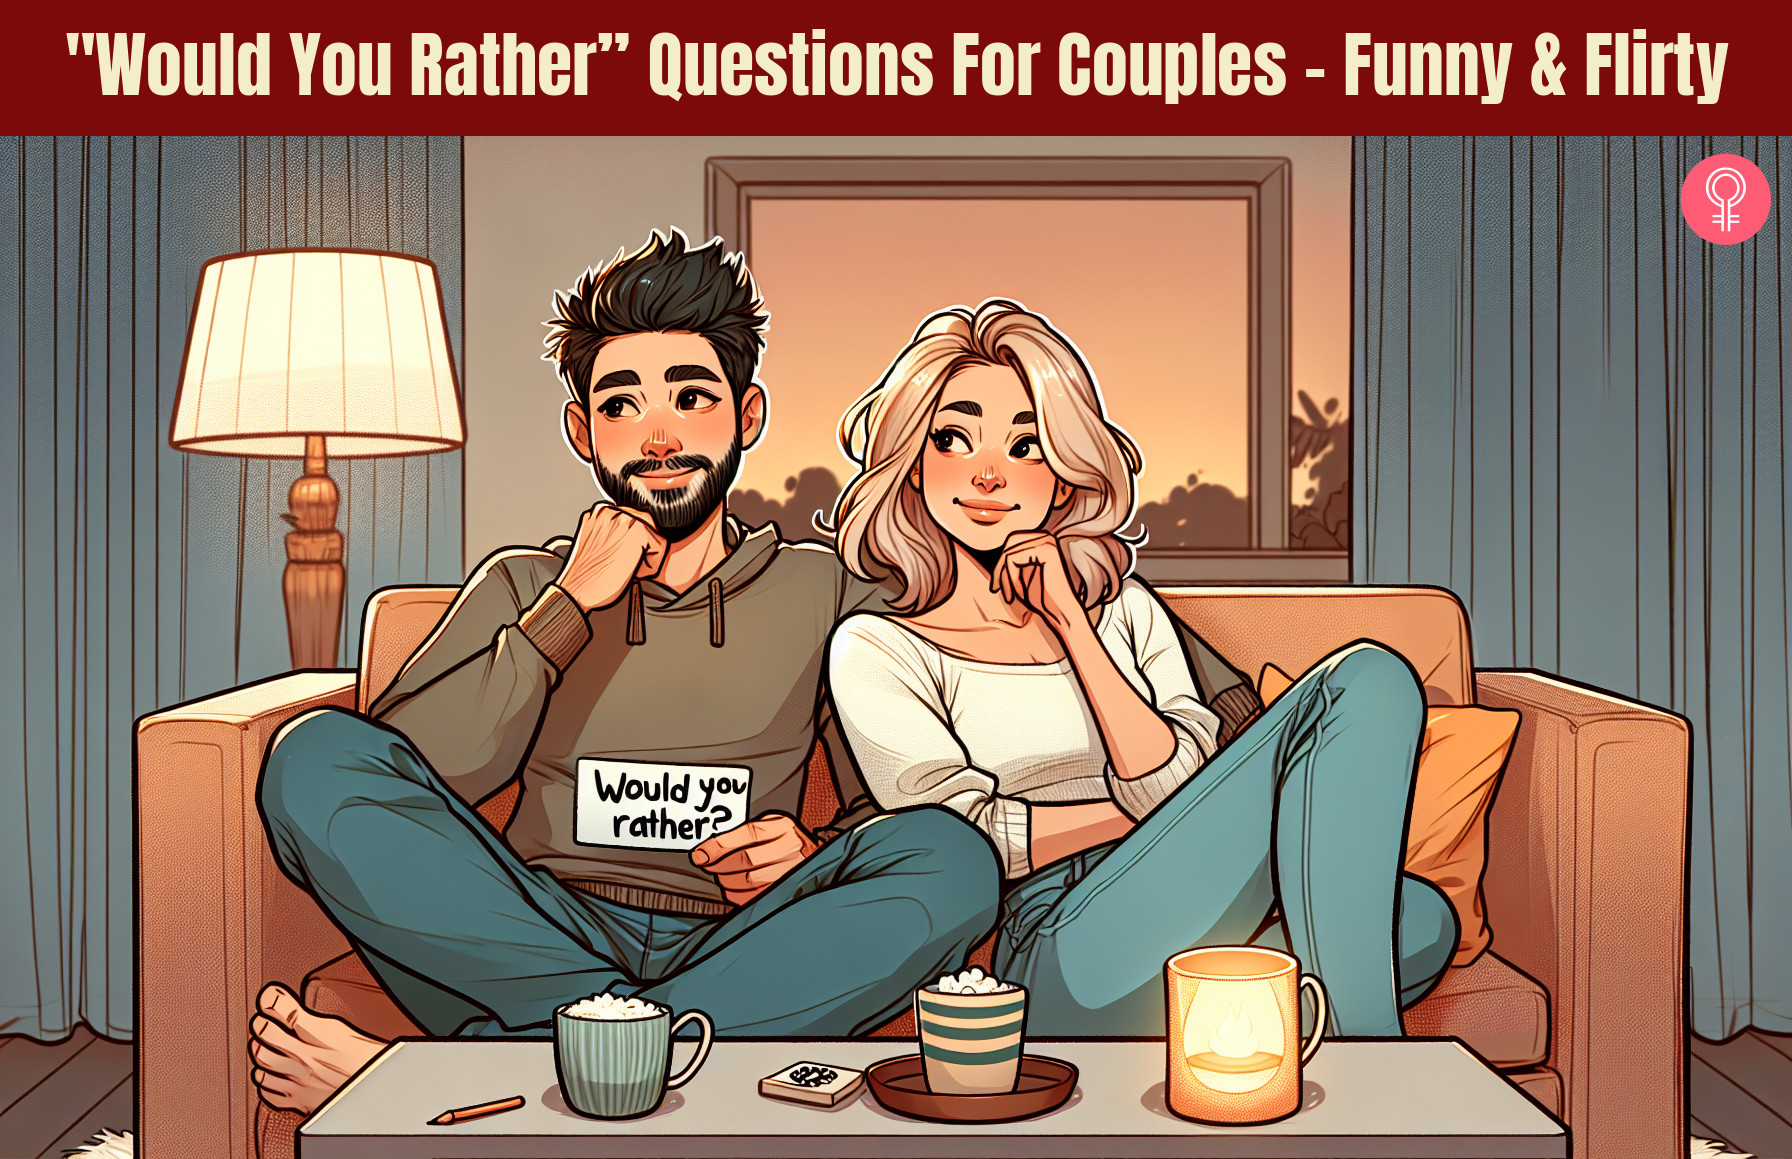 would you rather questions for couples_illustration